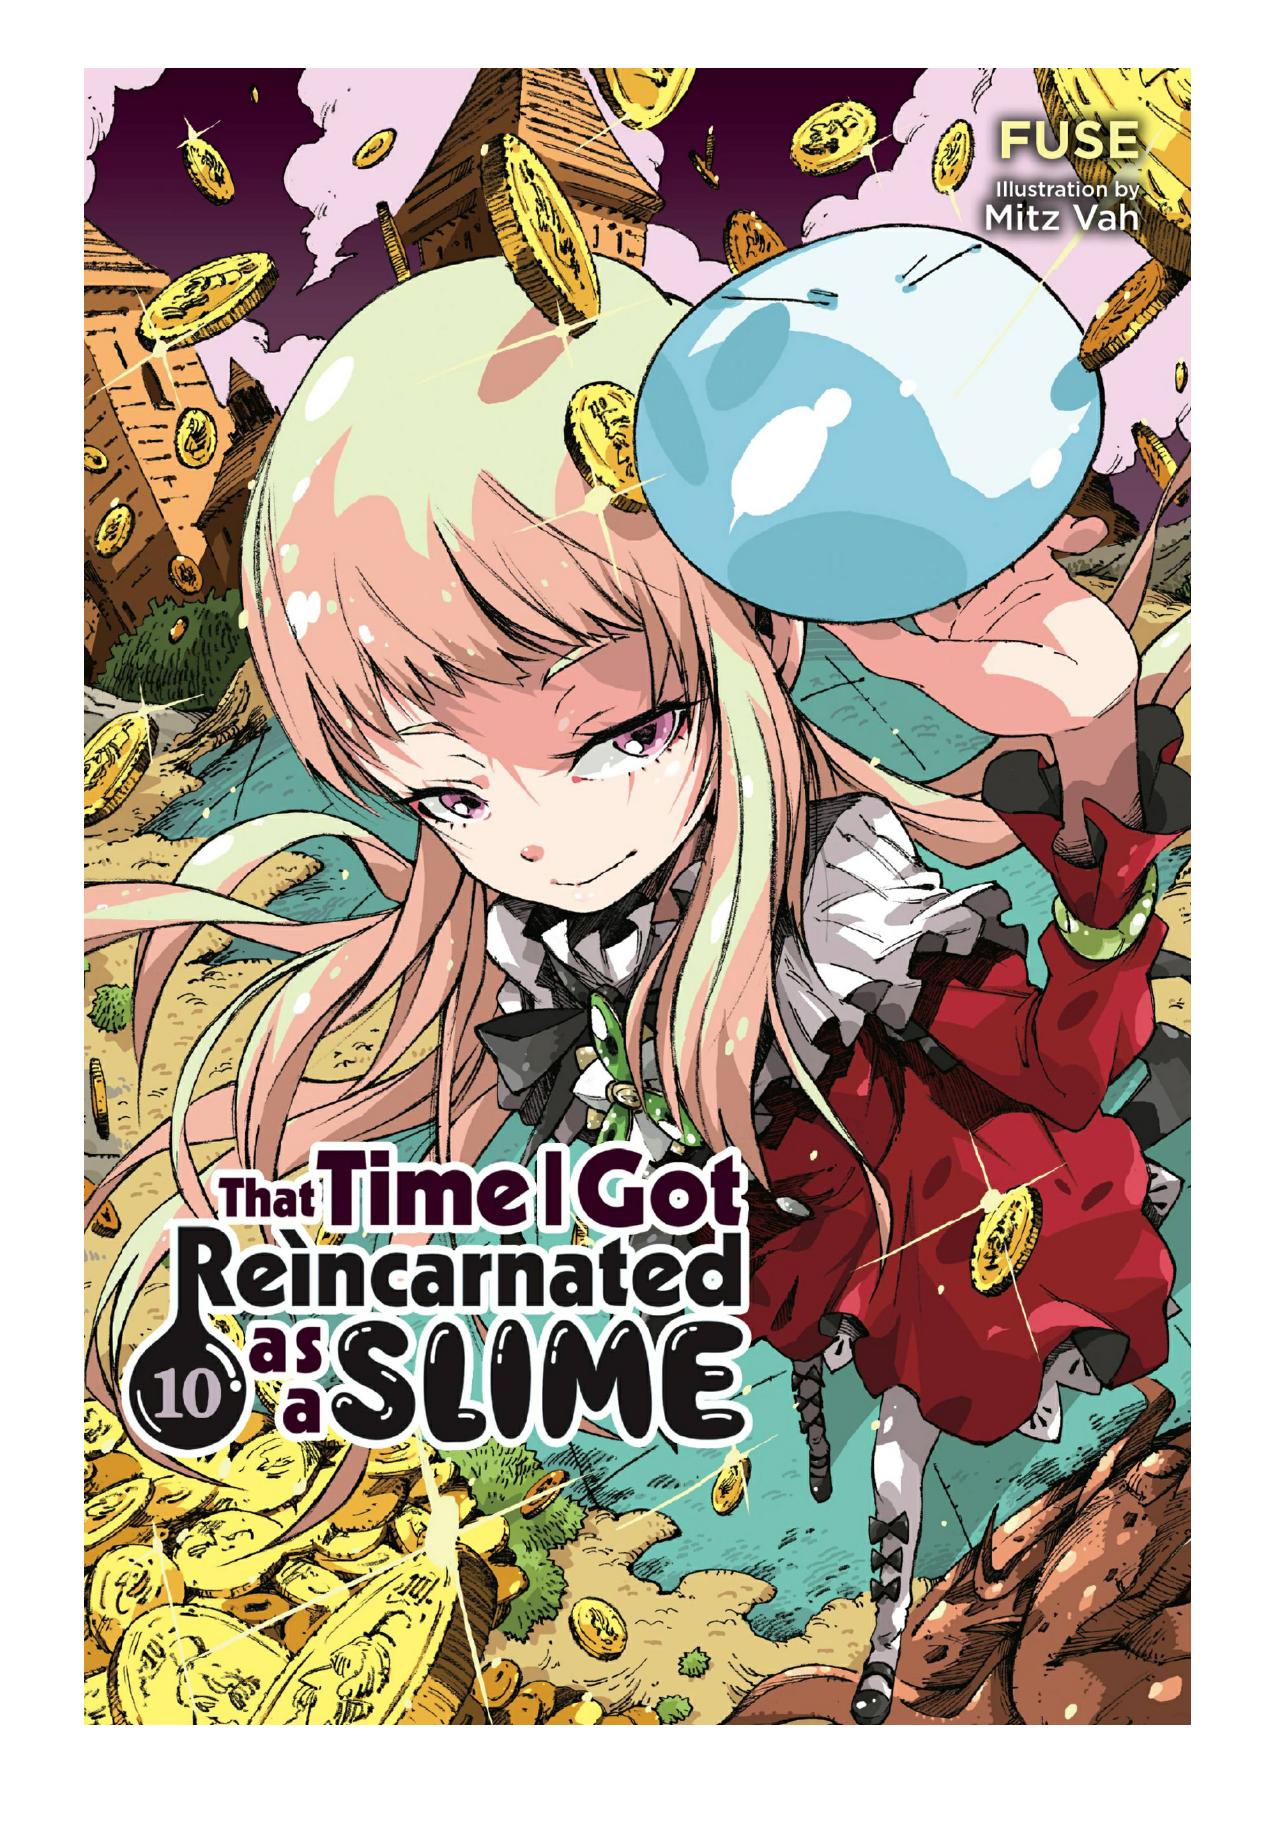 That Time I Got Reincarnated as a Slime, Vol. 10 by Fuse & Mitz Vah